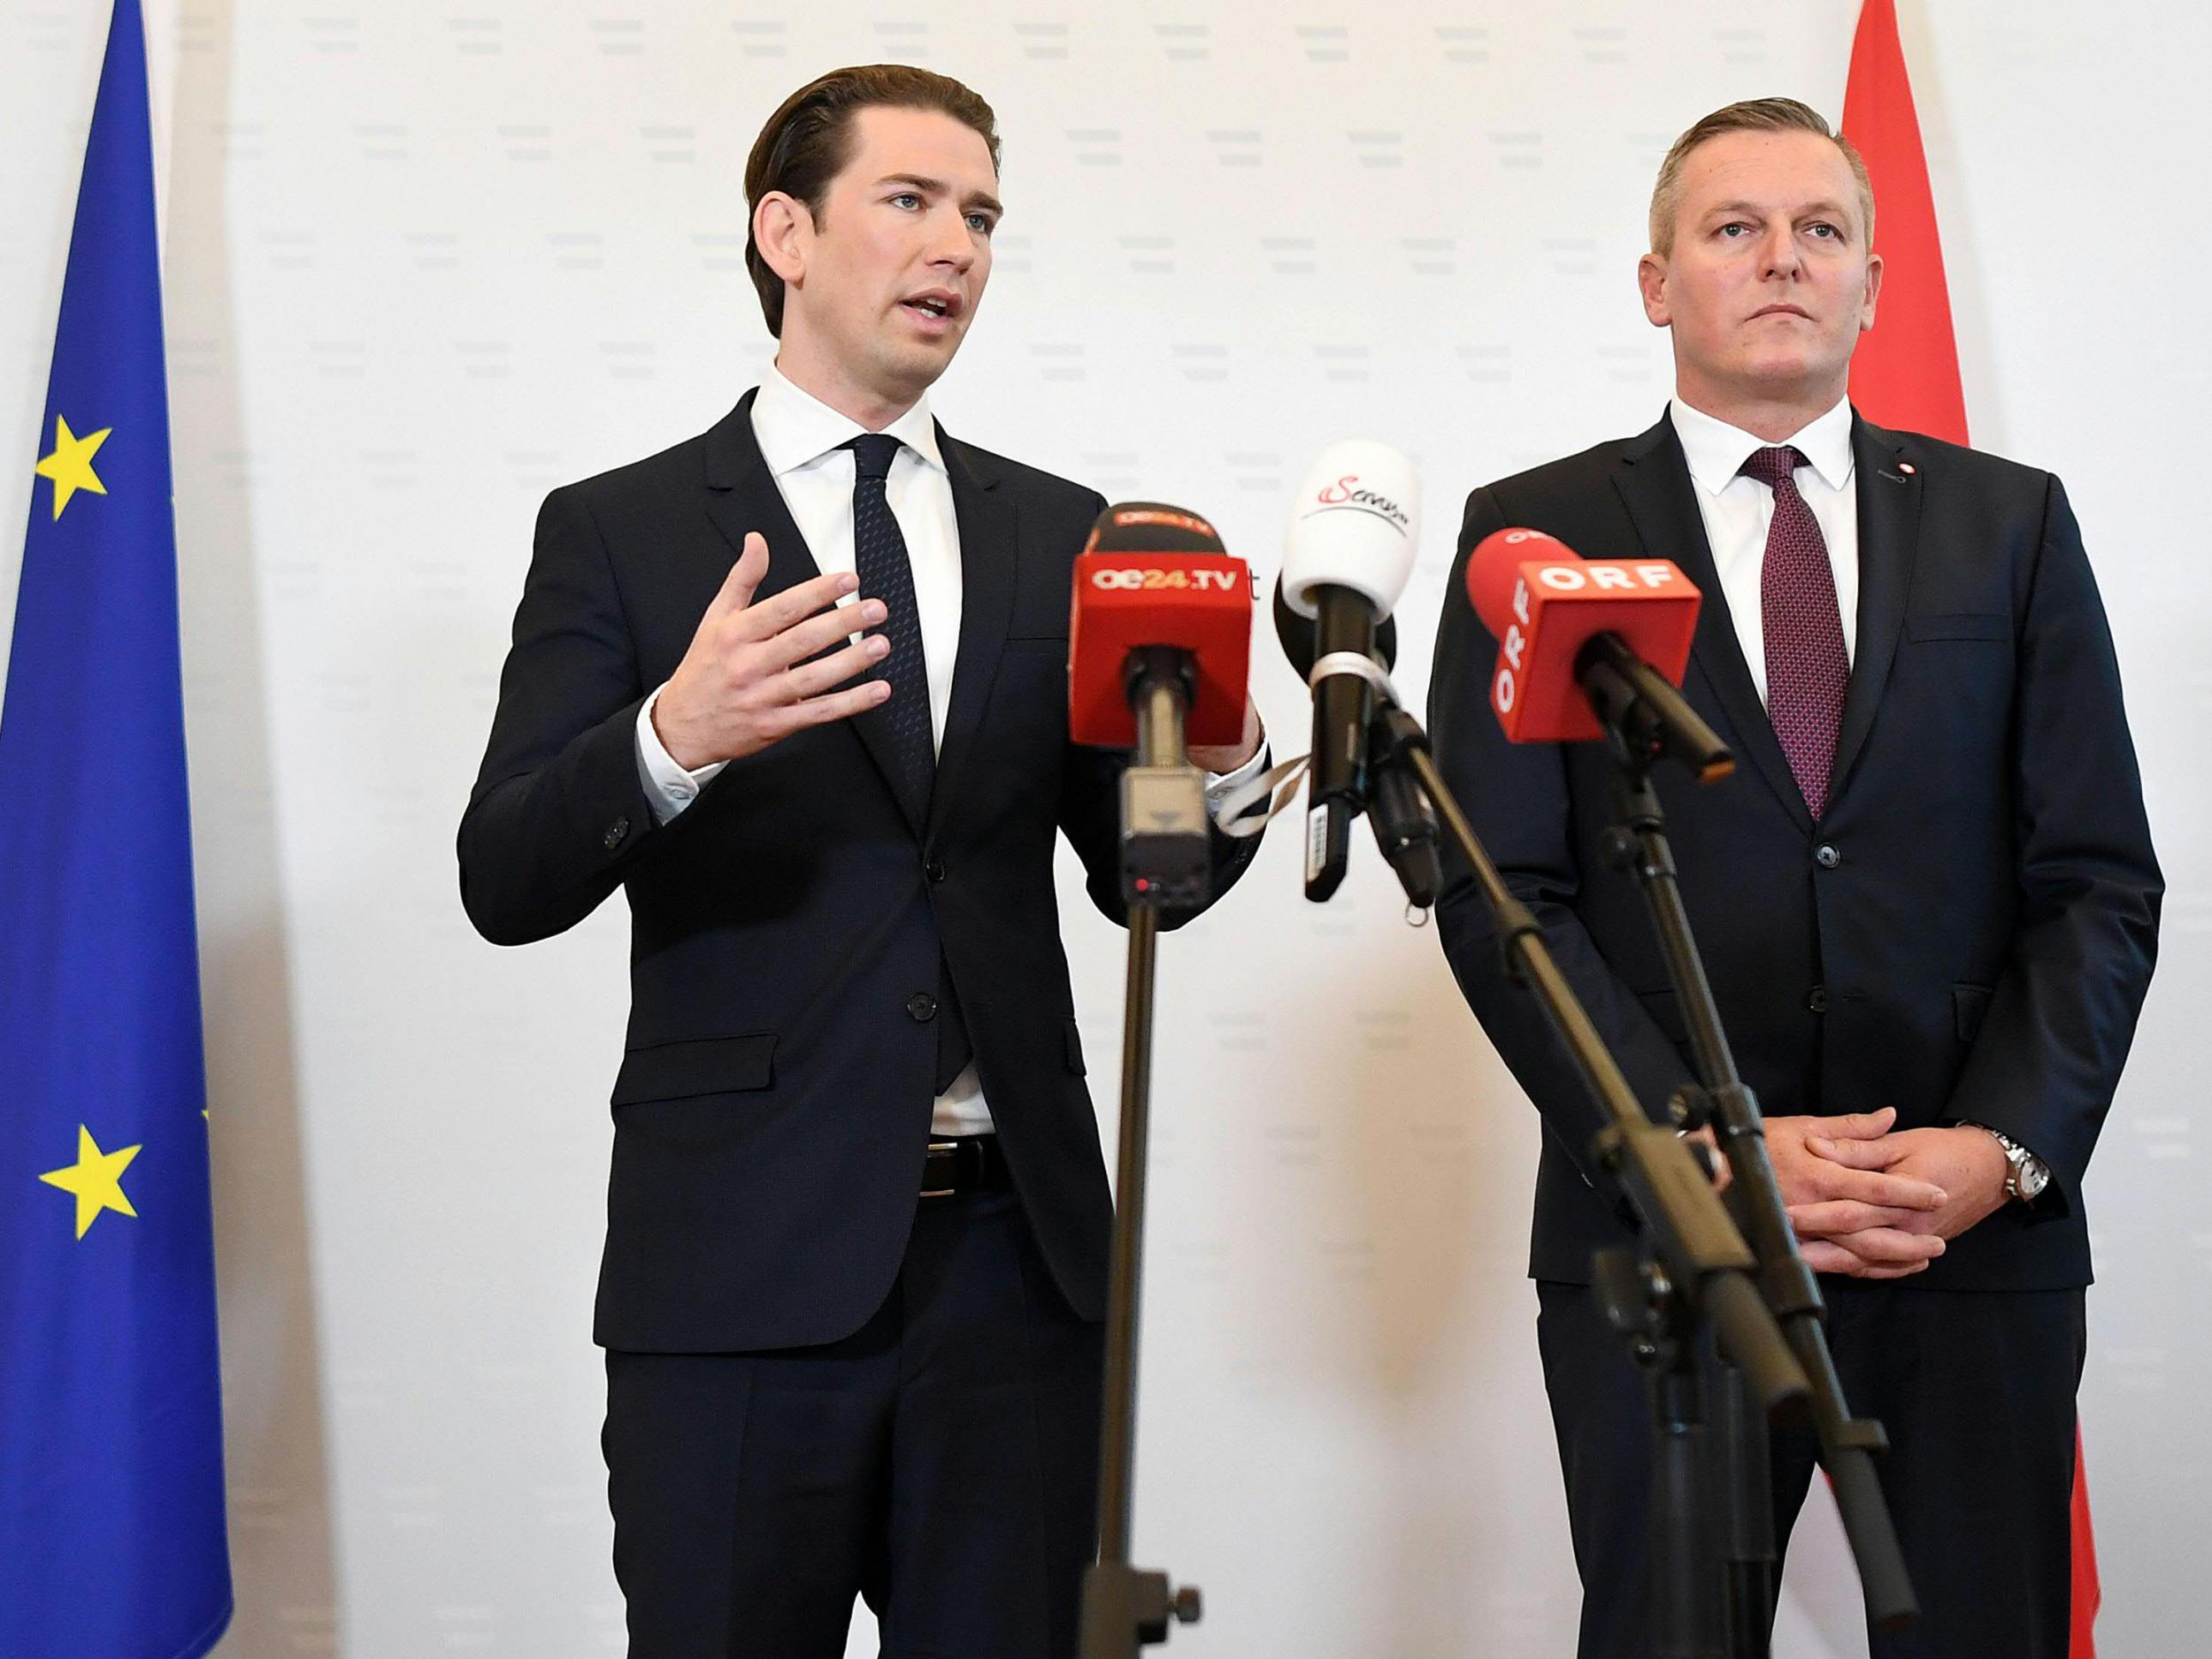 Austrian chancellor Sebastian Kurz (left) and defence minister Mario Kunasek (right) give a press conference in Vienna,